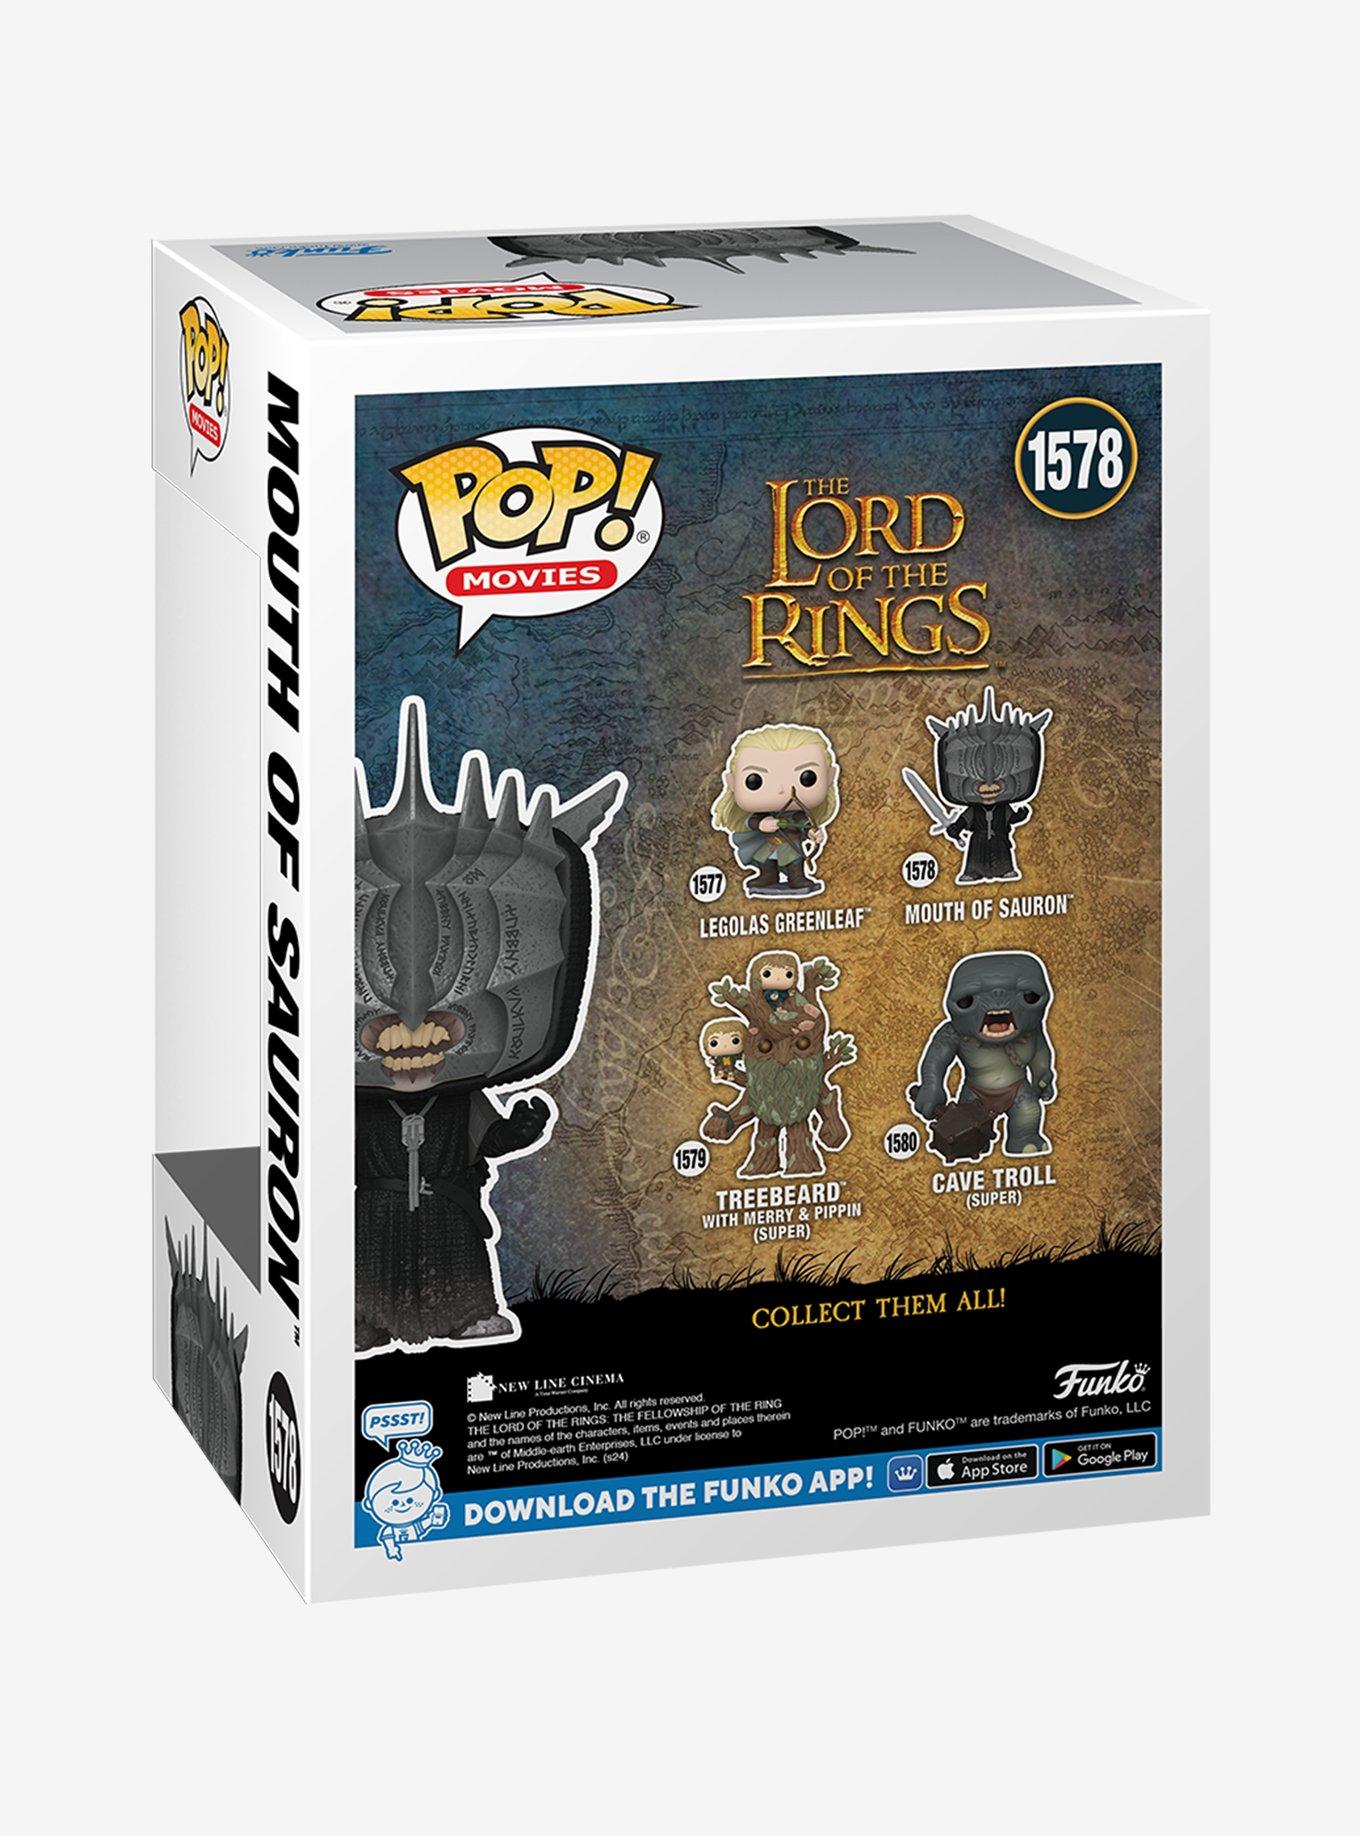 Funko Pop! Movies The Lord of the Rings Mouth of Sauron Vinyl Figure, , alternate